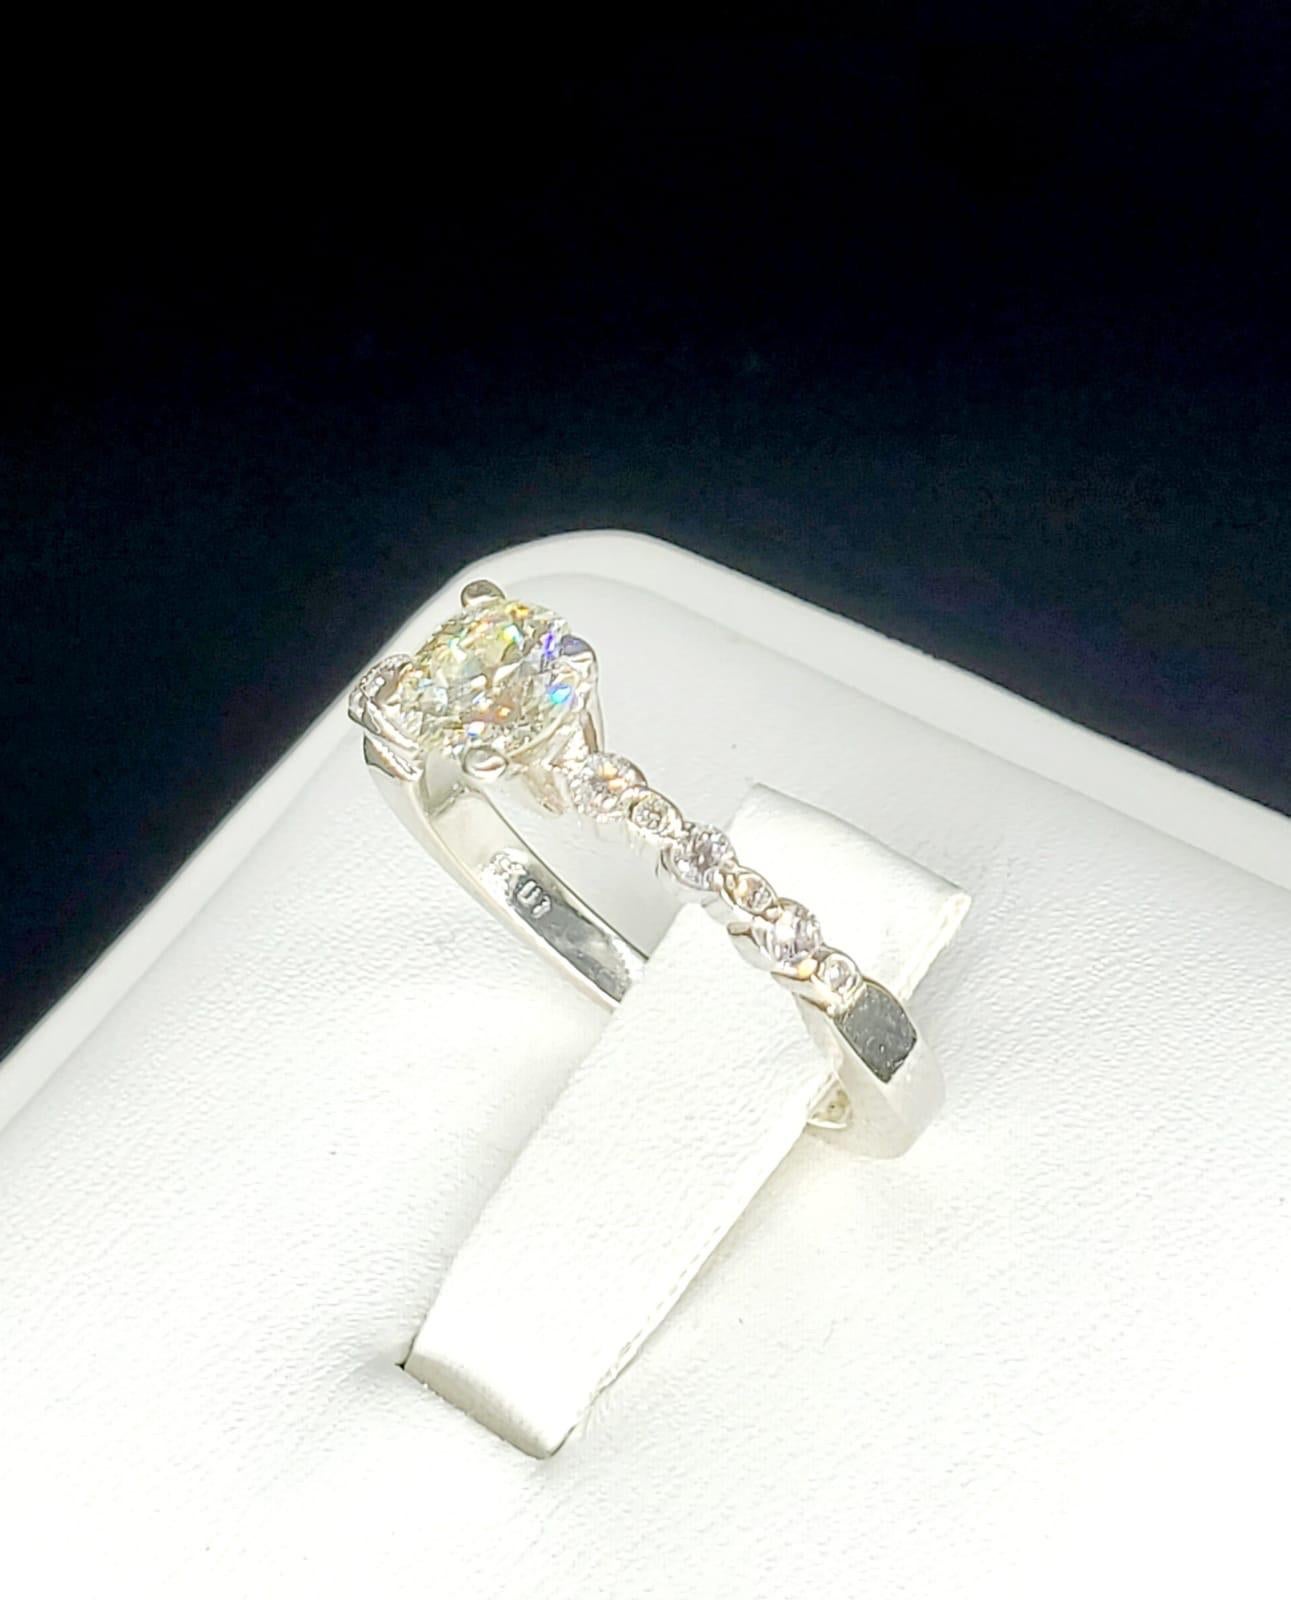 Old European Cut 0.70 Carat Round Diamond Ring 14k White Gold. Circa Art Deco 1950’s. Features 0.60 carat center diamond K/VS surrounded by 12 round cut diamonds totaling 0.10 carats. This ring shines and really sparkles from every angle. The ring